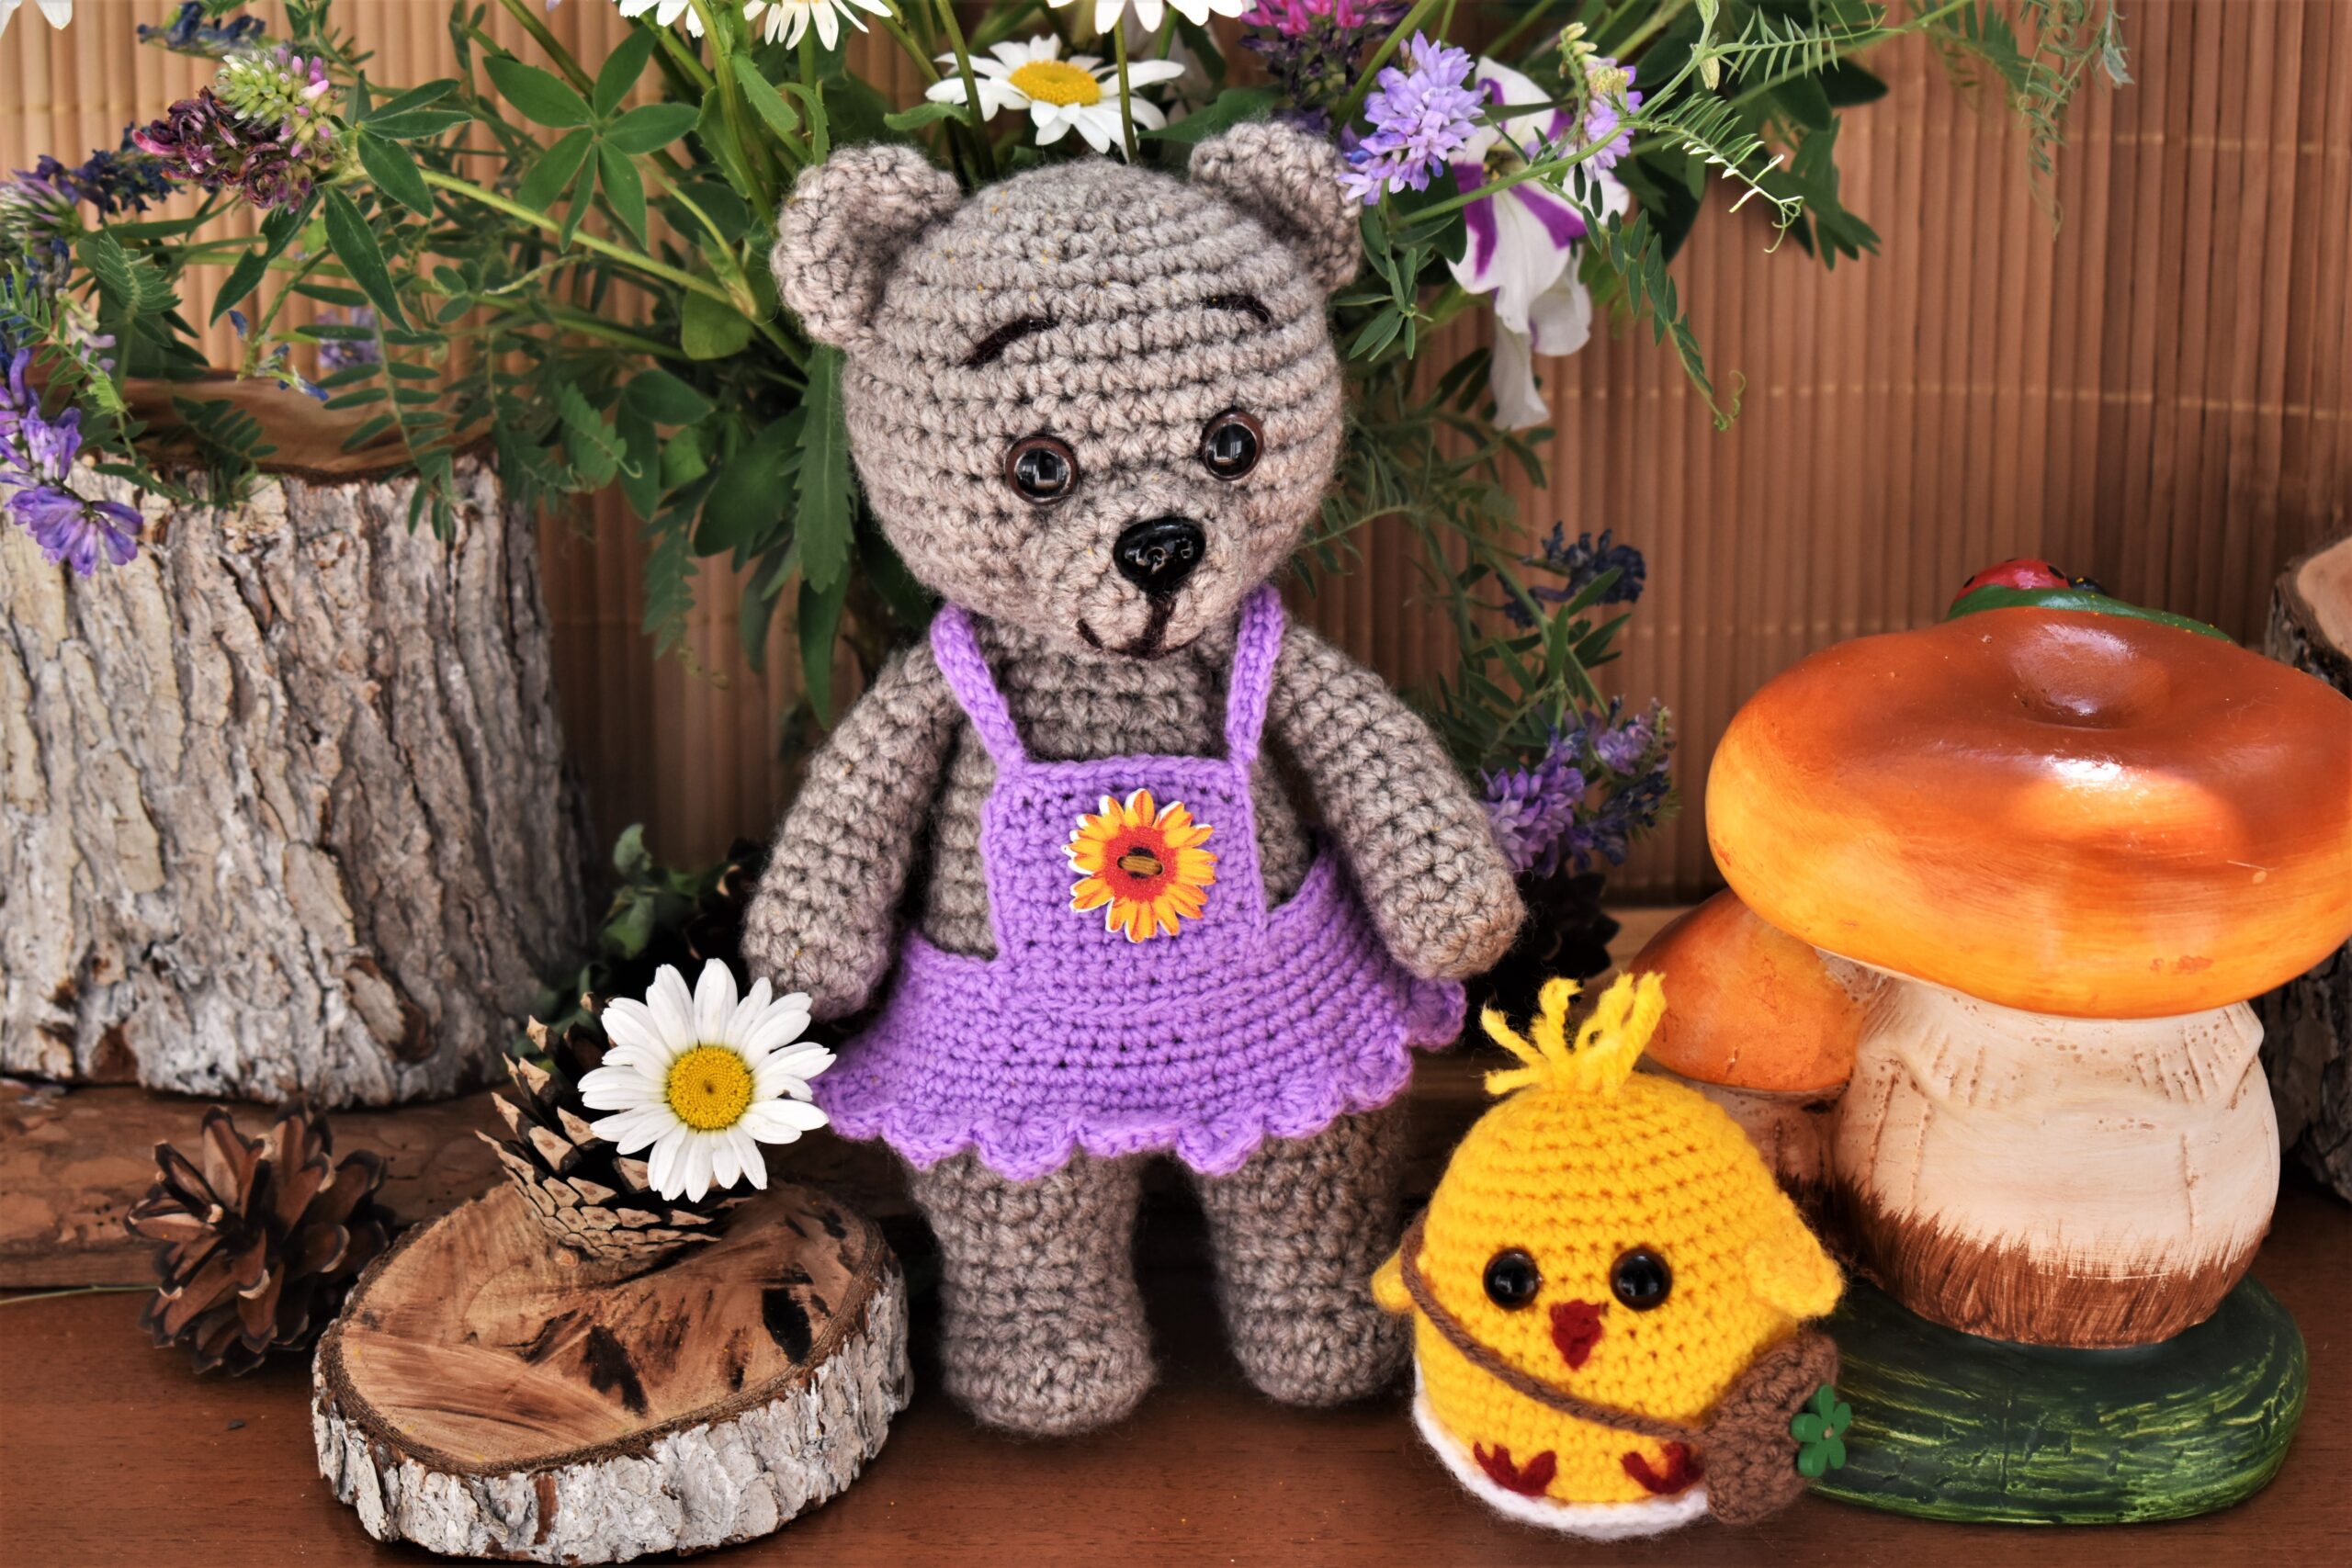 Stuffed crochet bear and chick surrounded by fake plants.